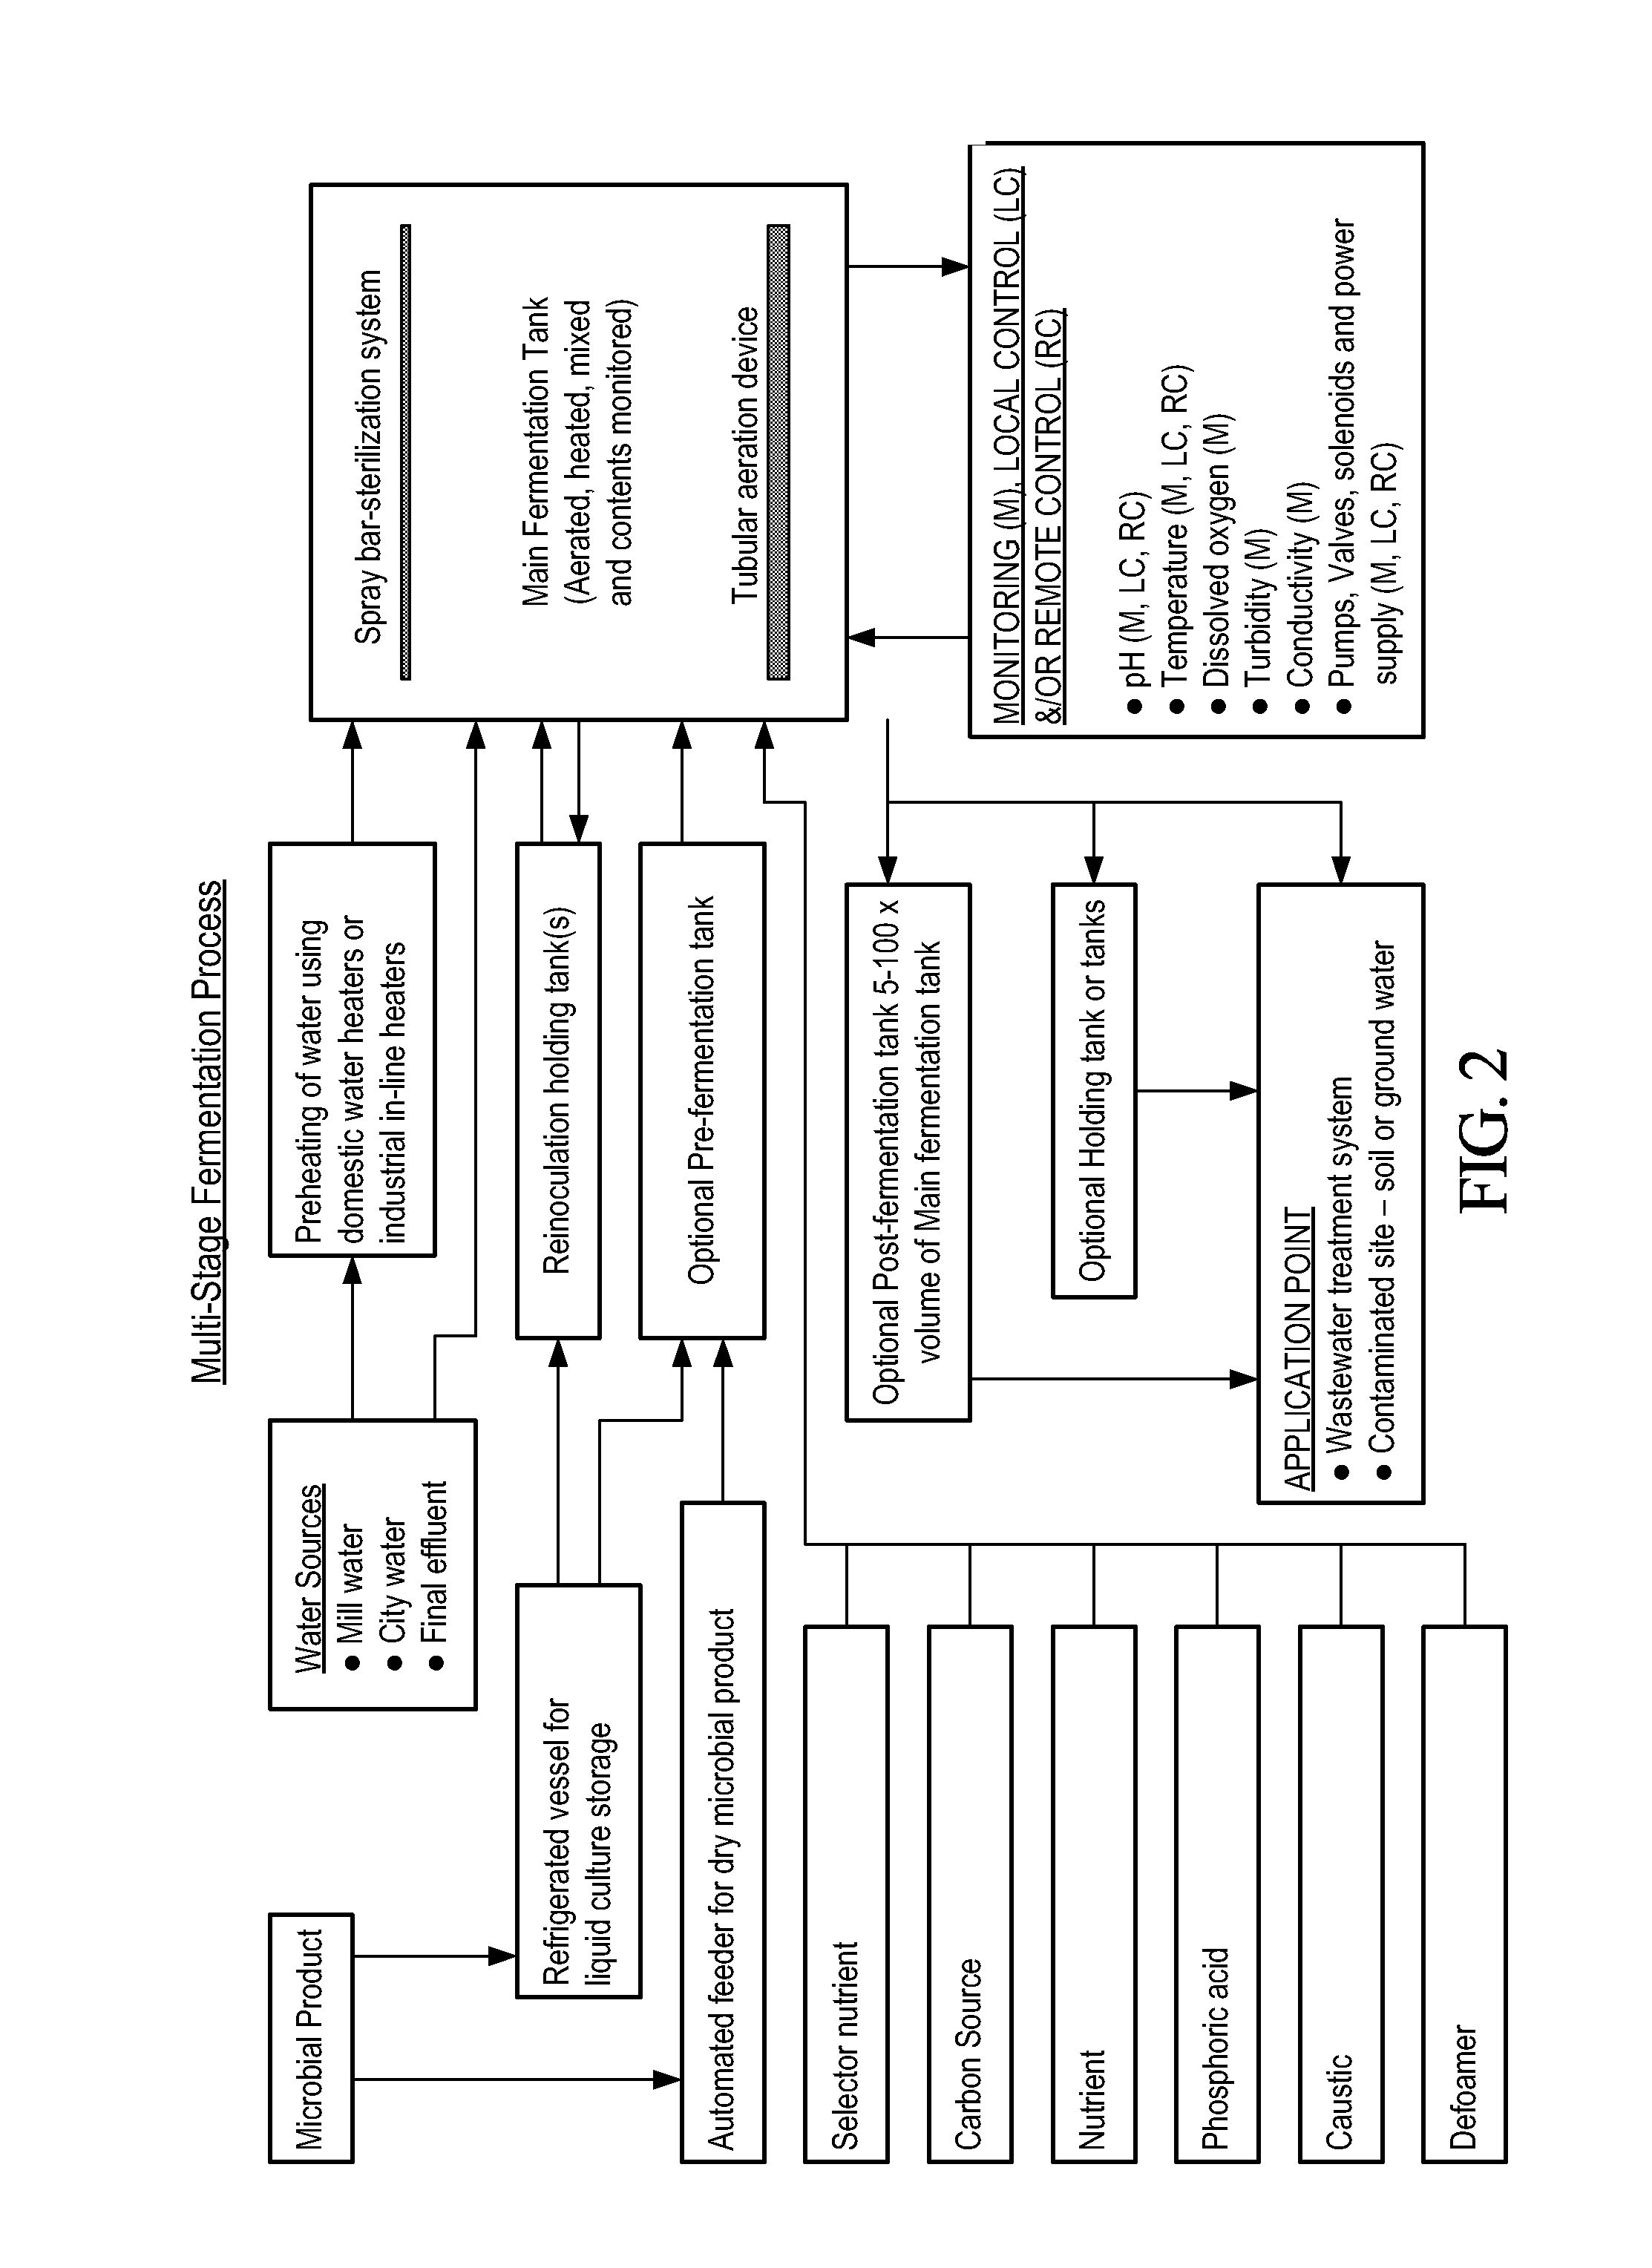 Methods of treatment of ground water